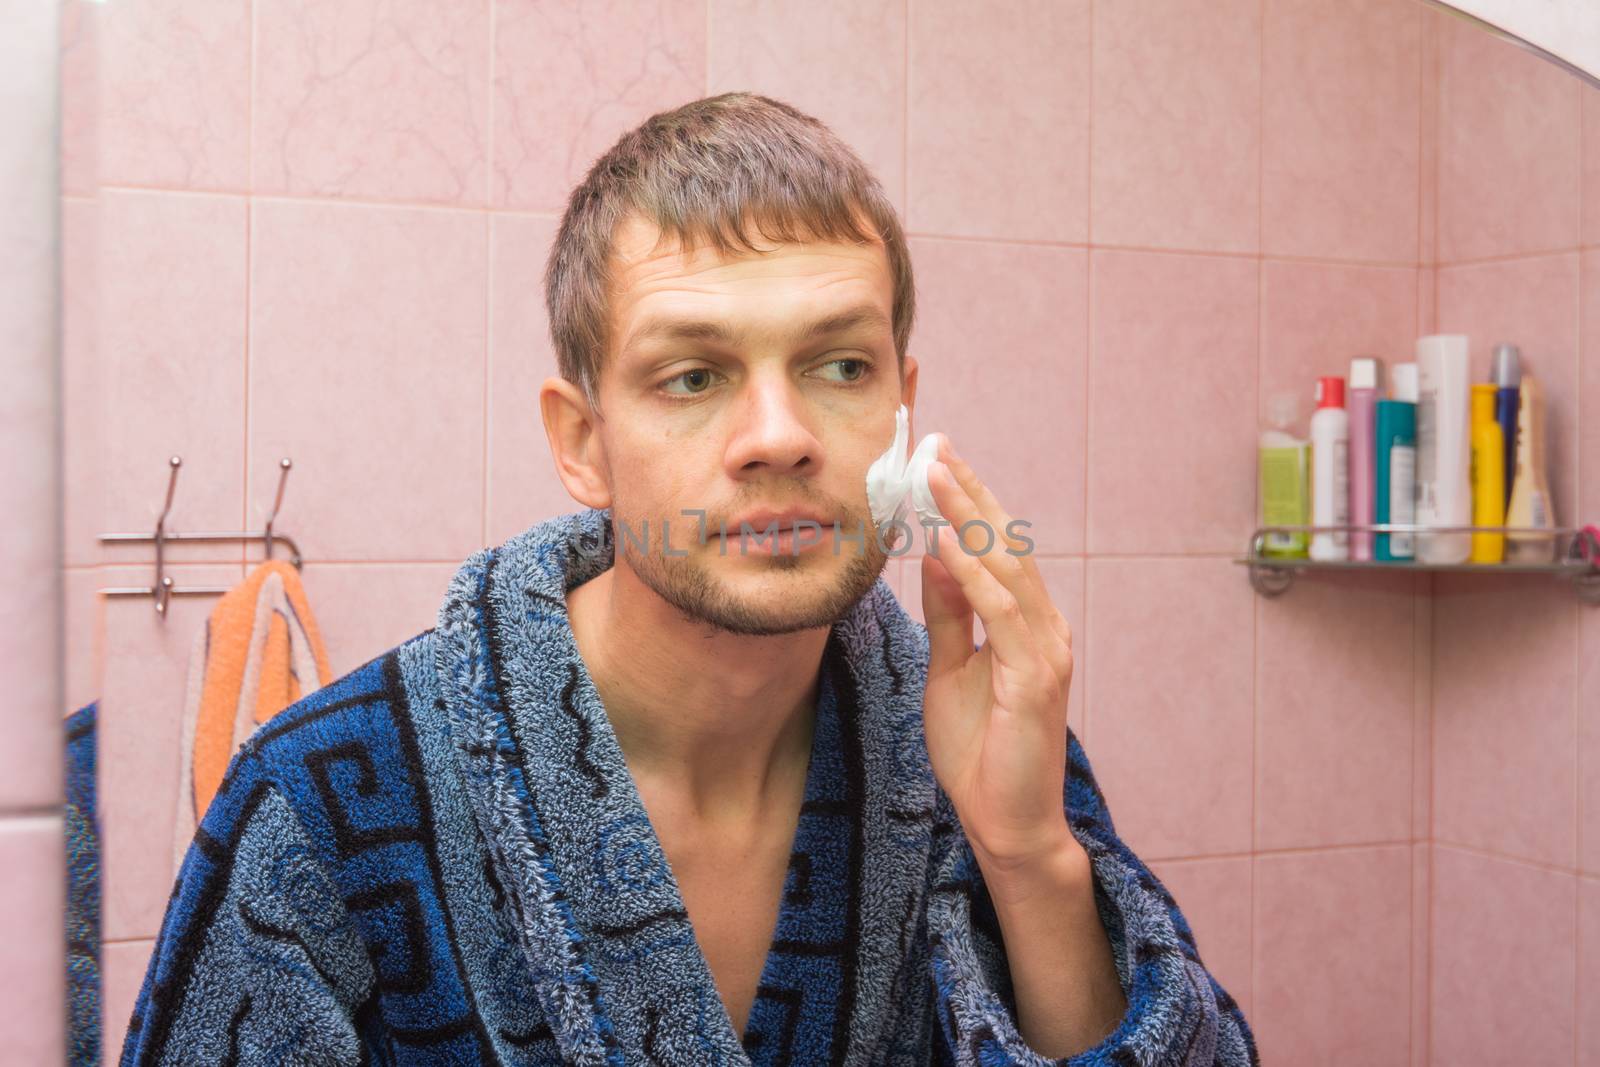 The young man begins to apply shaving foam on face